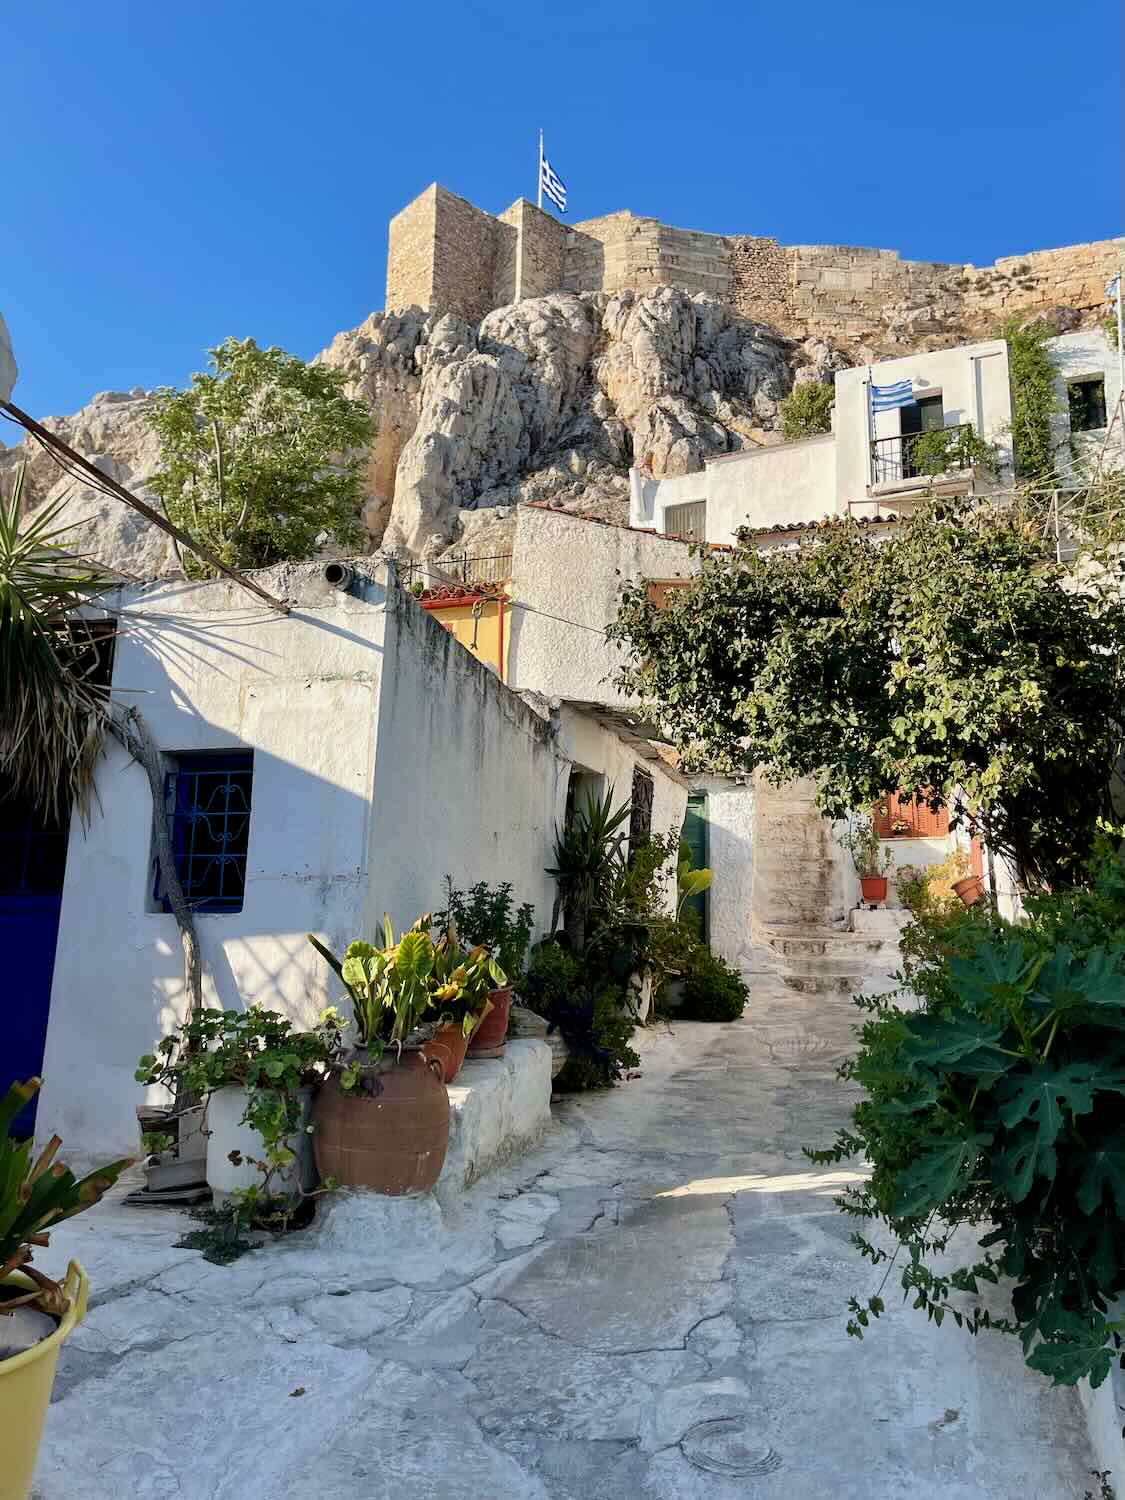 A charming street in the Plaka neighborhood of Athens, featuring white-washed buildings, lush greenery, and the Acropolis with a Greek flag visible in the background.